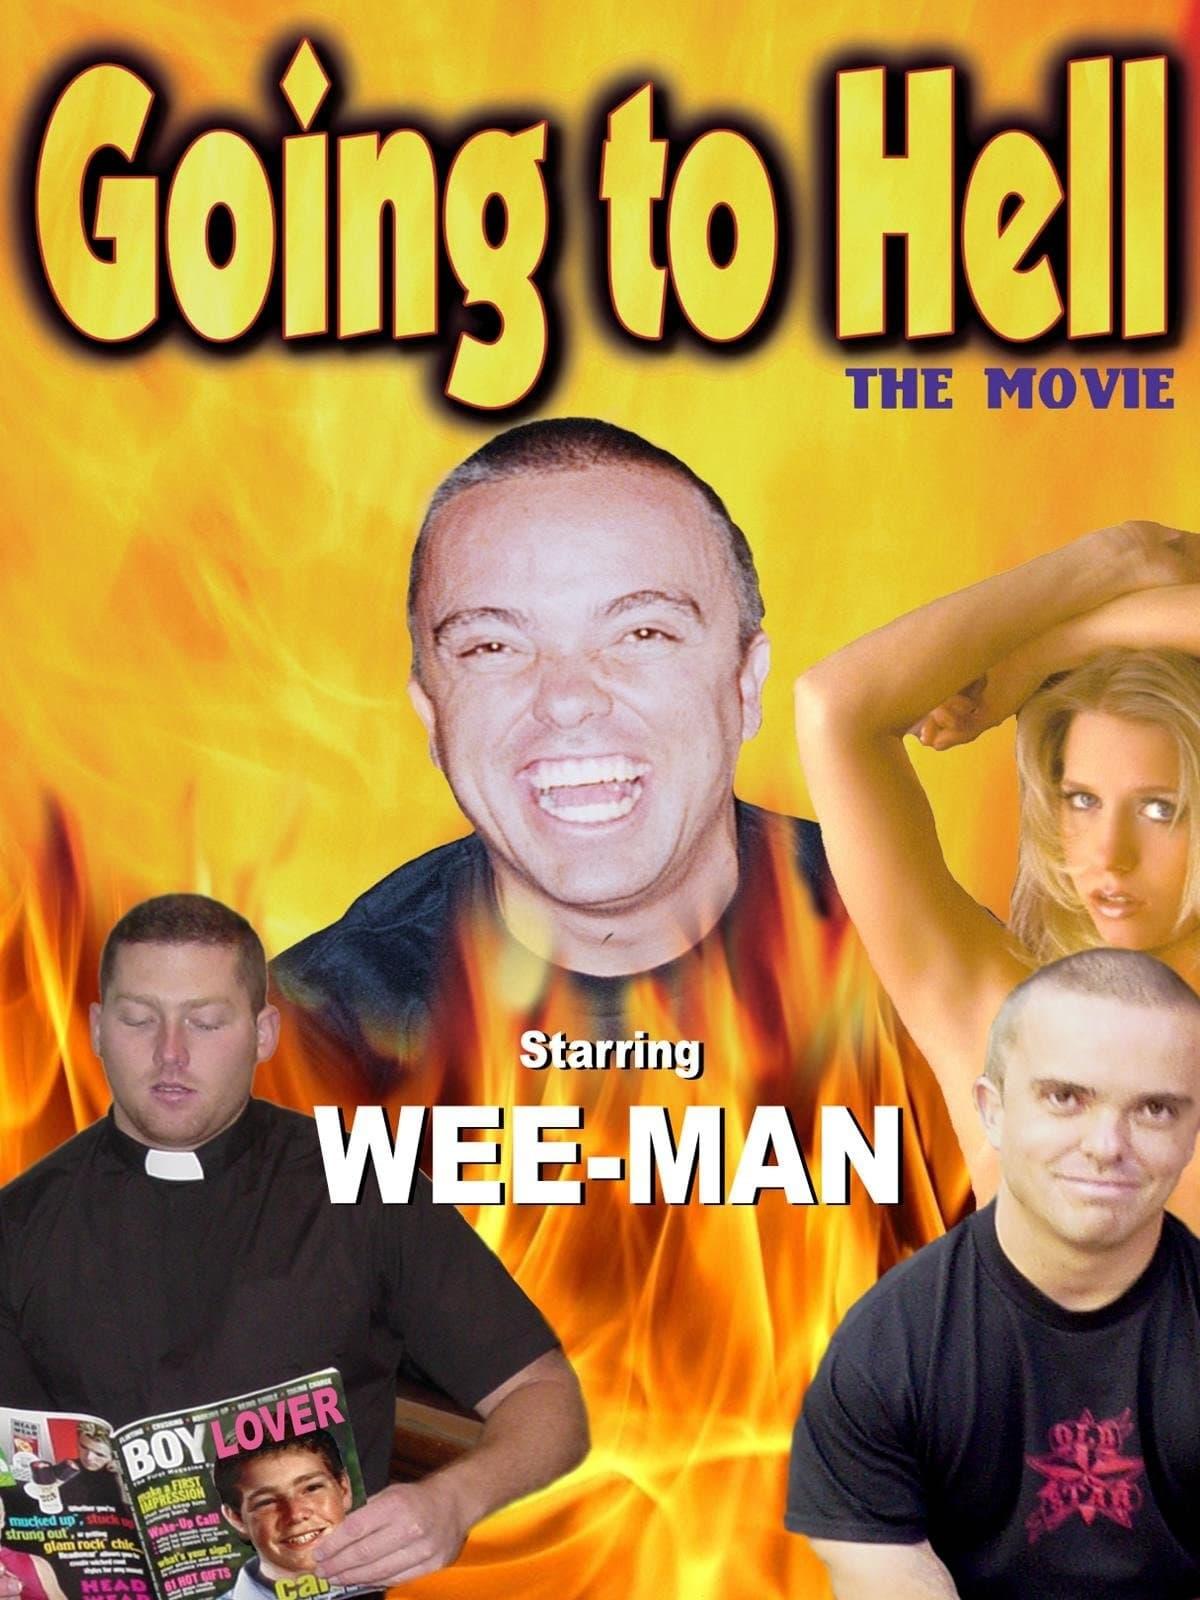 Going to Hell: The Movie poster